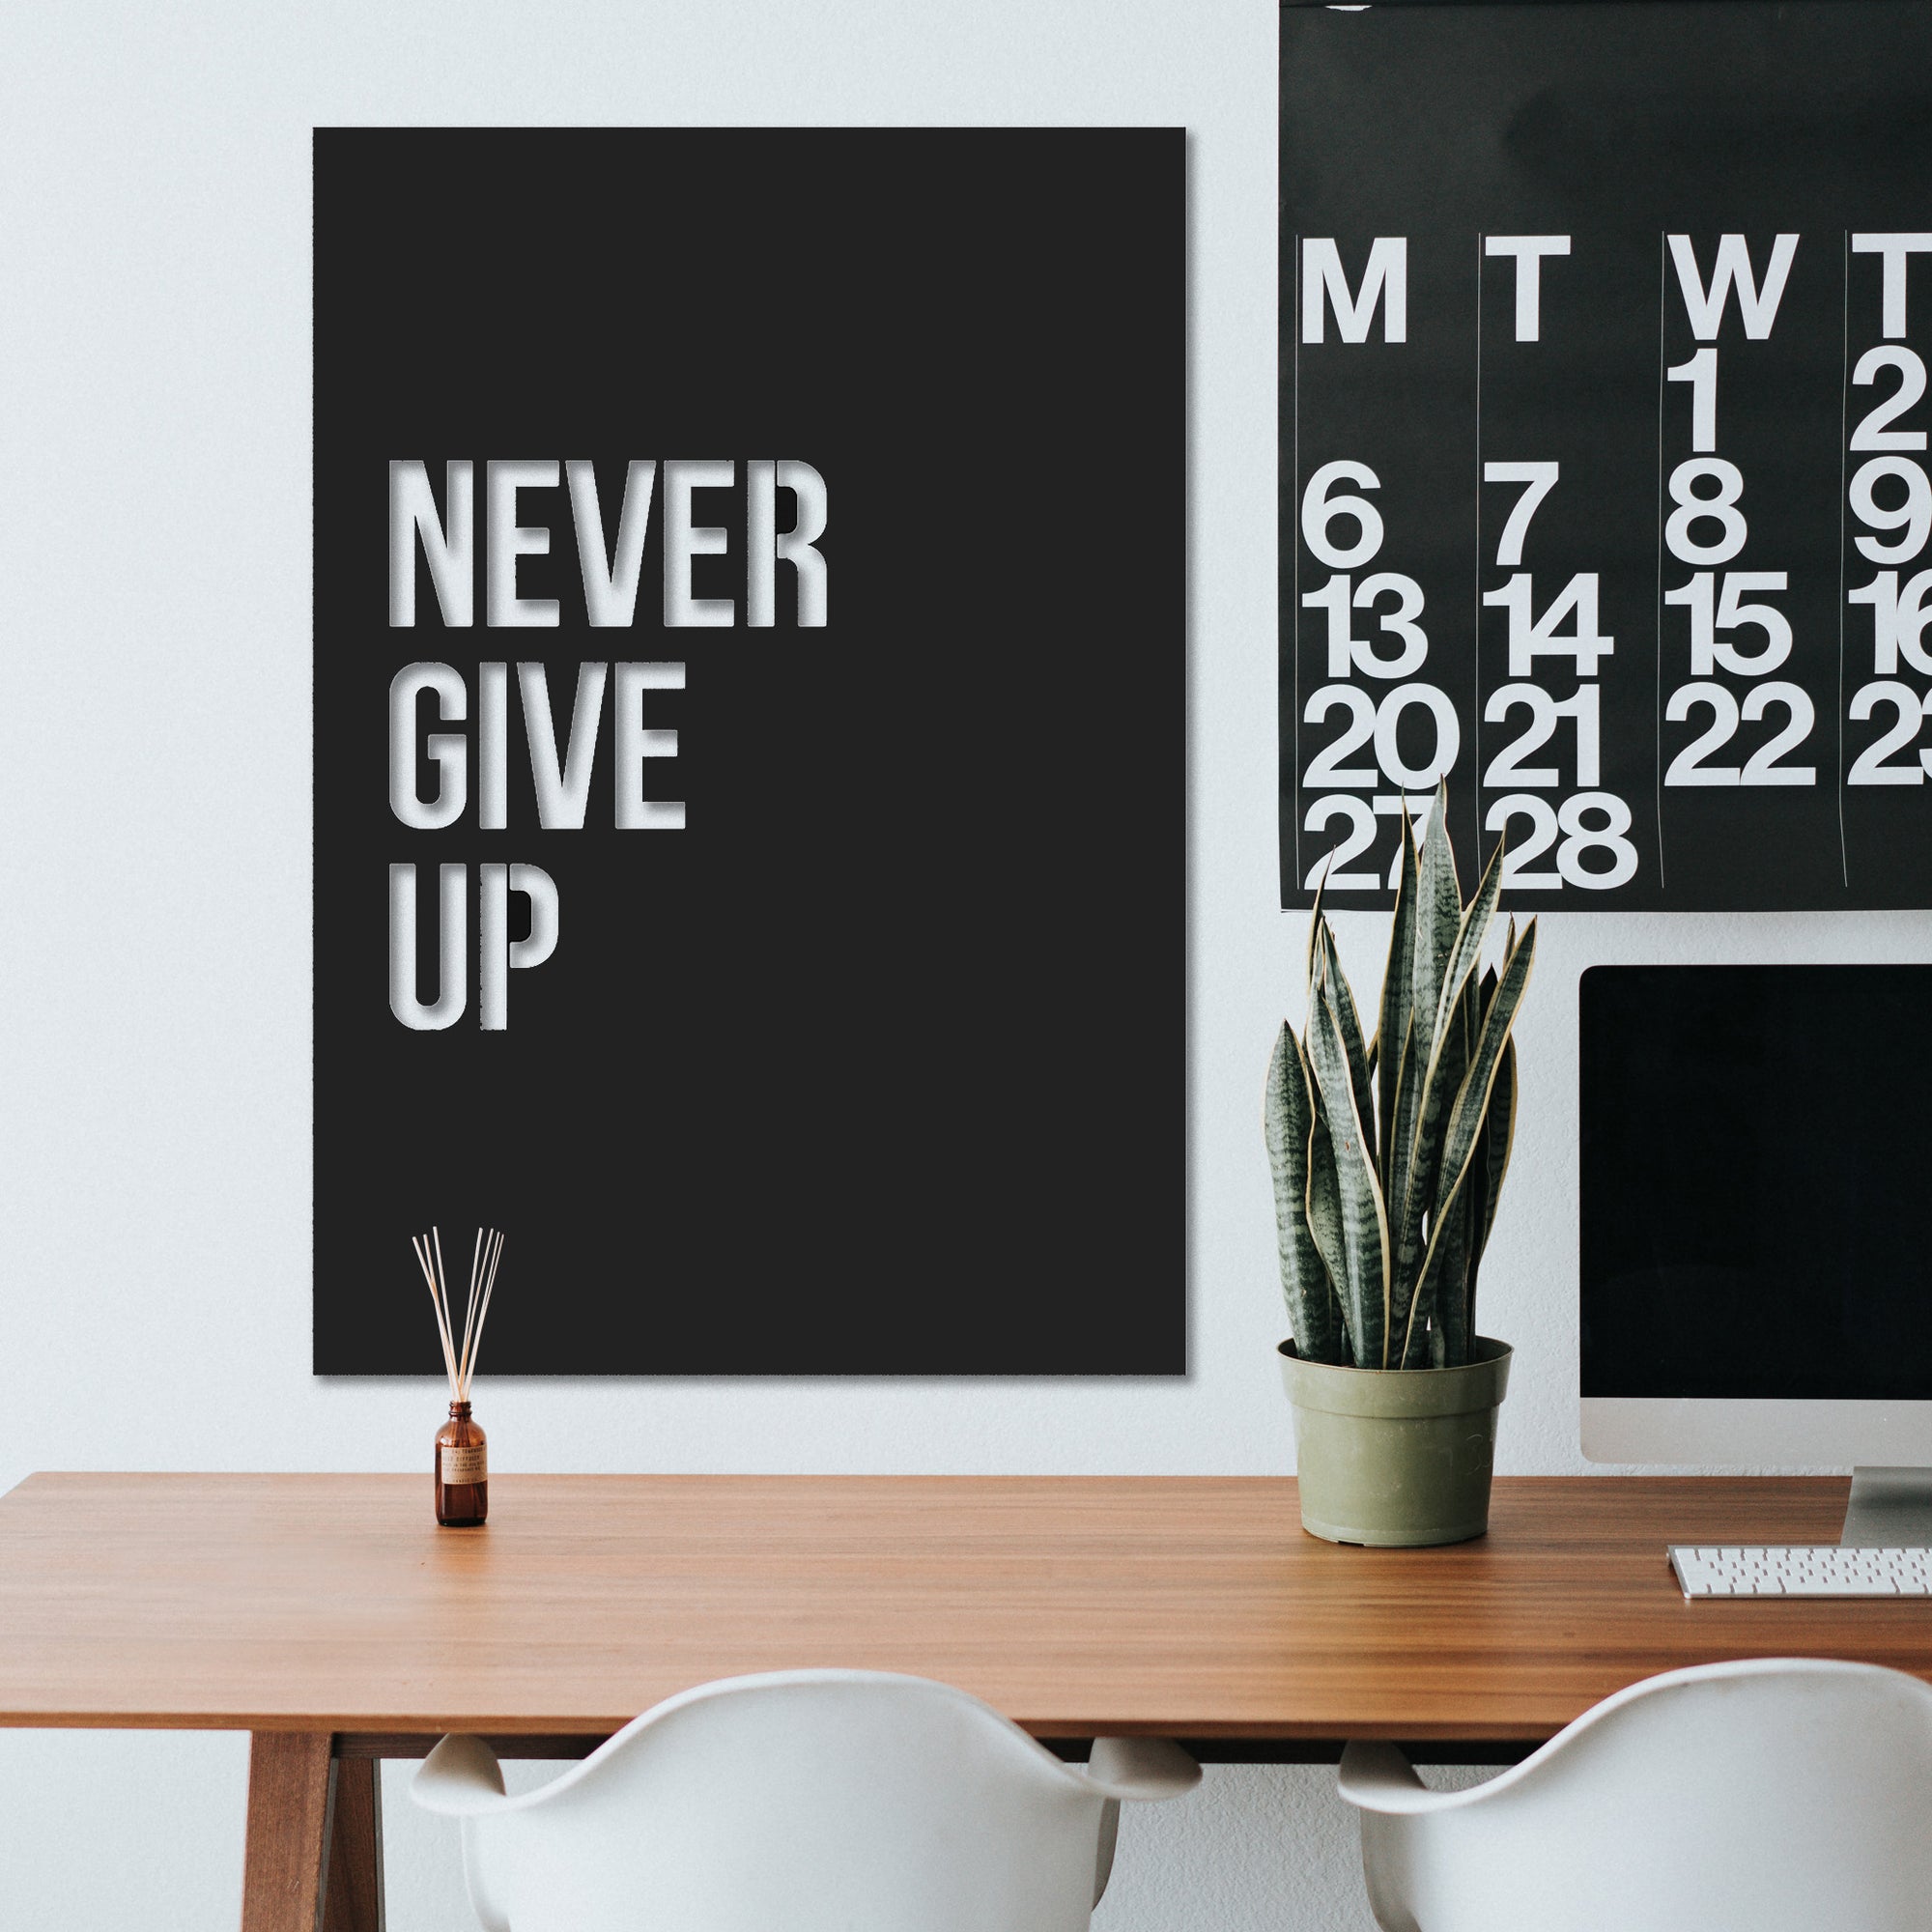 Never Give Up - Metal Wall Art